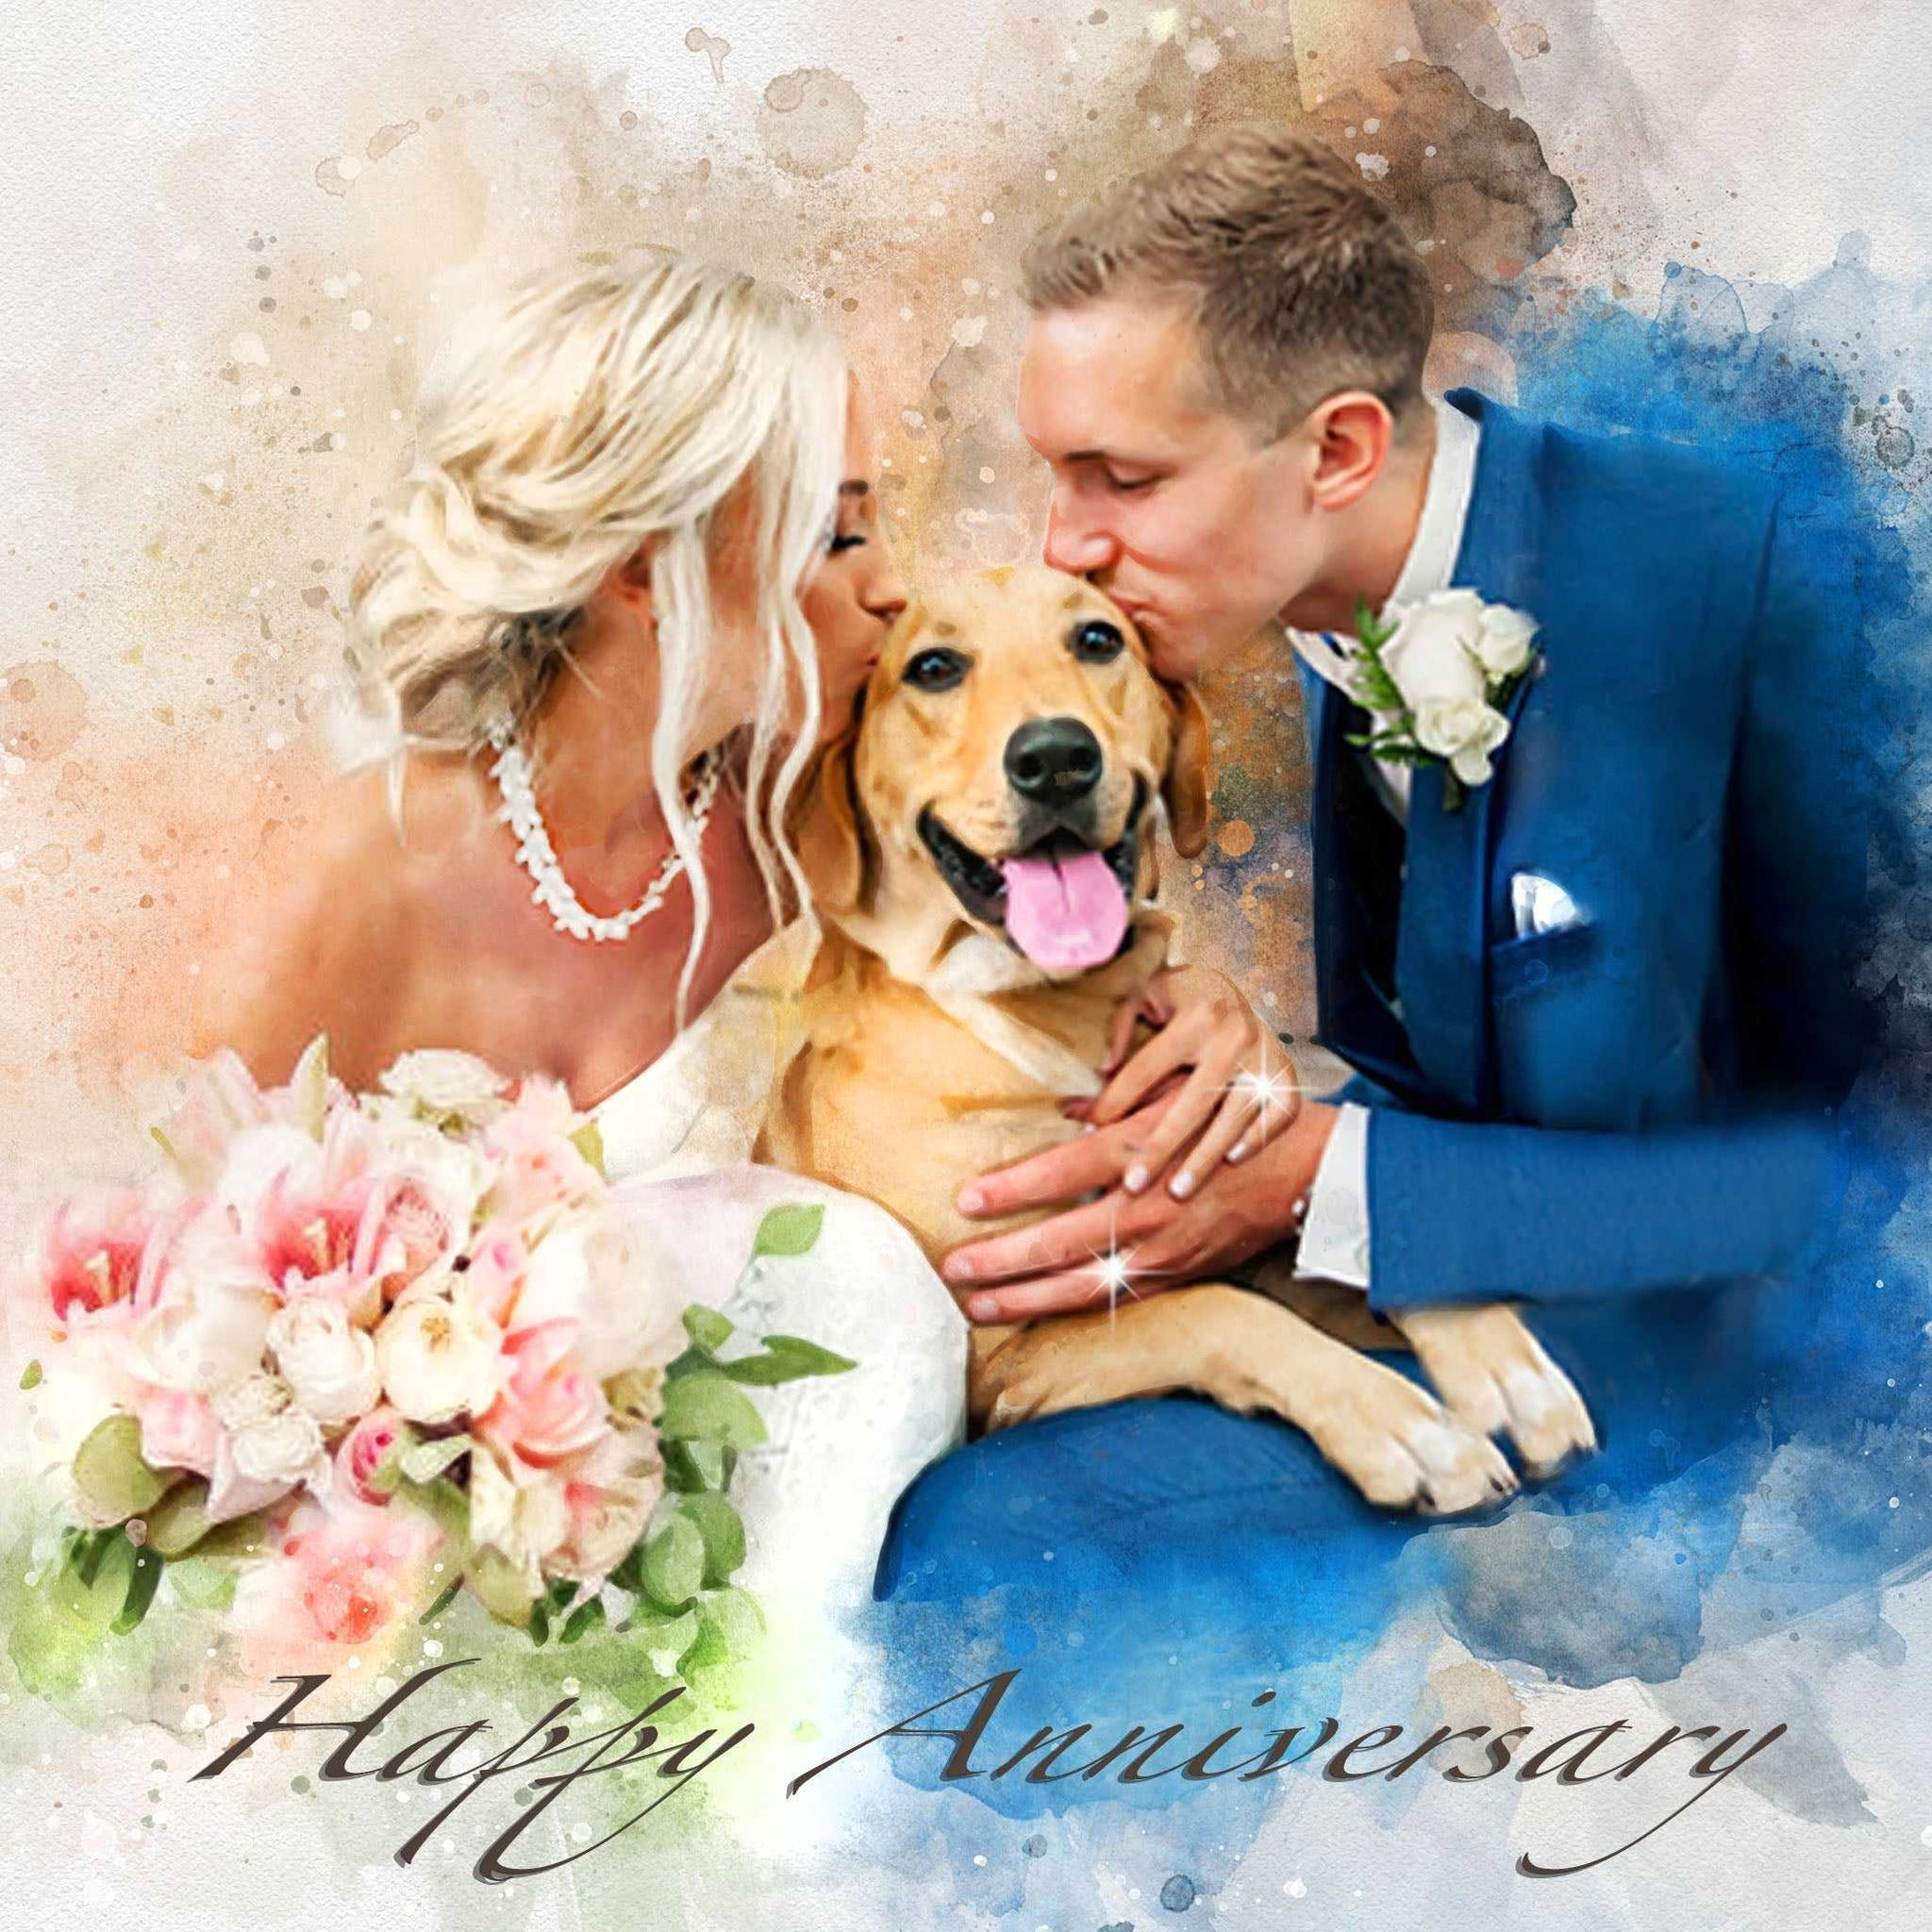 Meaningful Anniversary Gift | Custom Painting from Photo | Romantic Gift Ideas for Her and Him - FromPicToArt